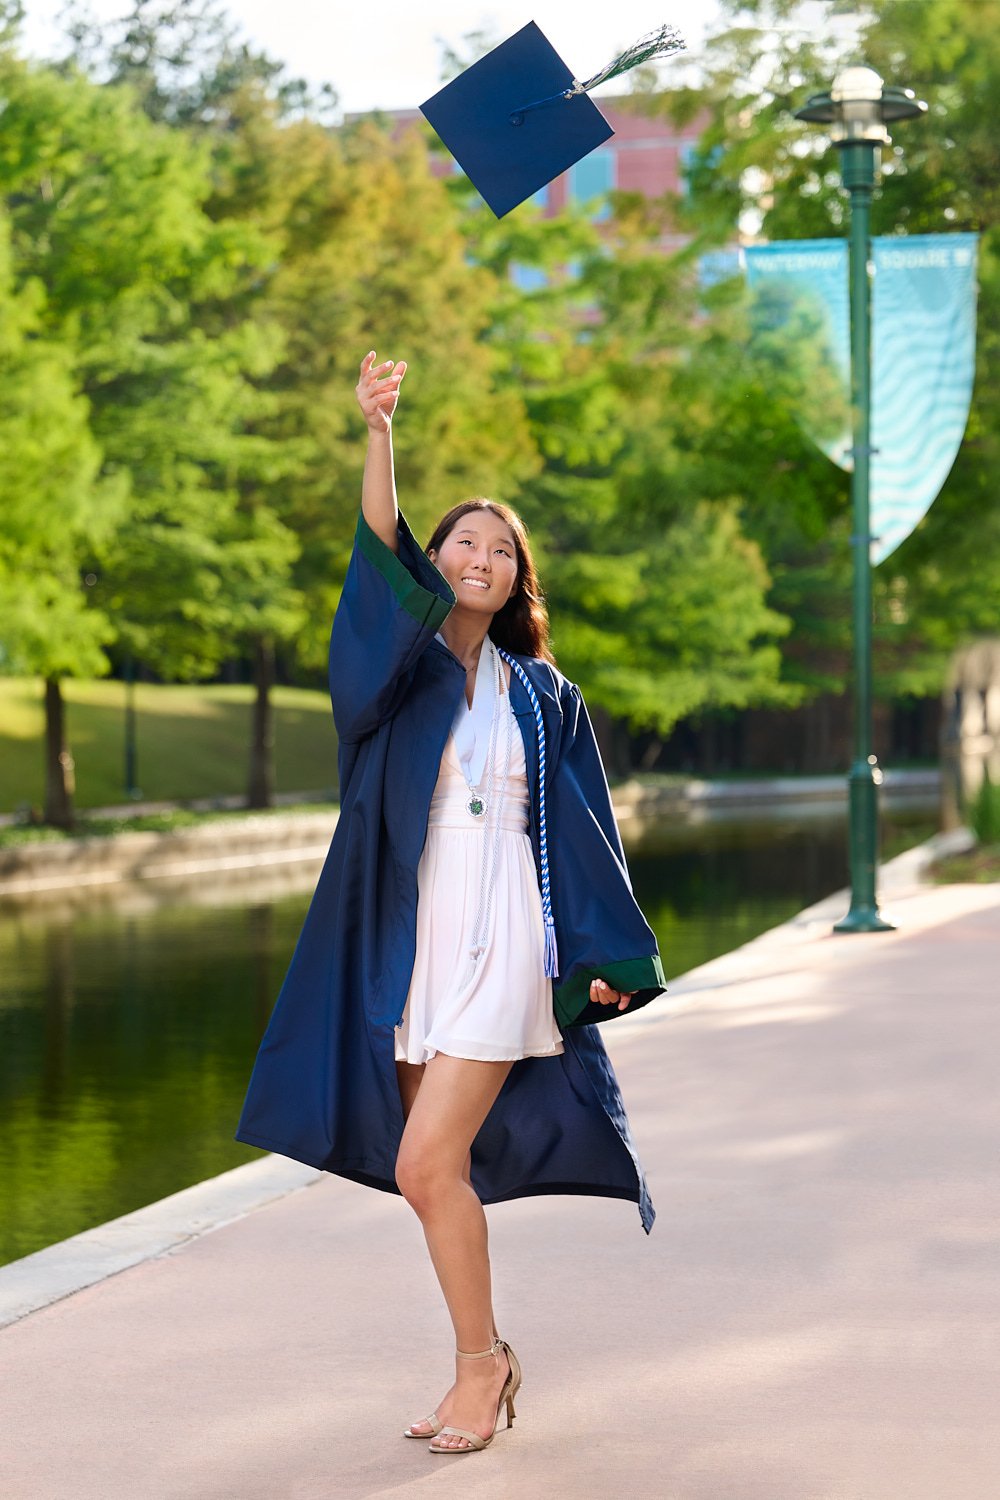  THE WOODLANDS, TEXAS - MAY 20th 2023:  pretty girl Nuray Demessinova is photographed in navy blue graduation cap and gown, celebrating finishing The Woodlands College Park School, Texas class of 2023 